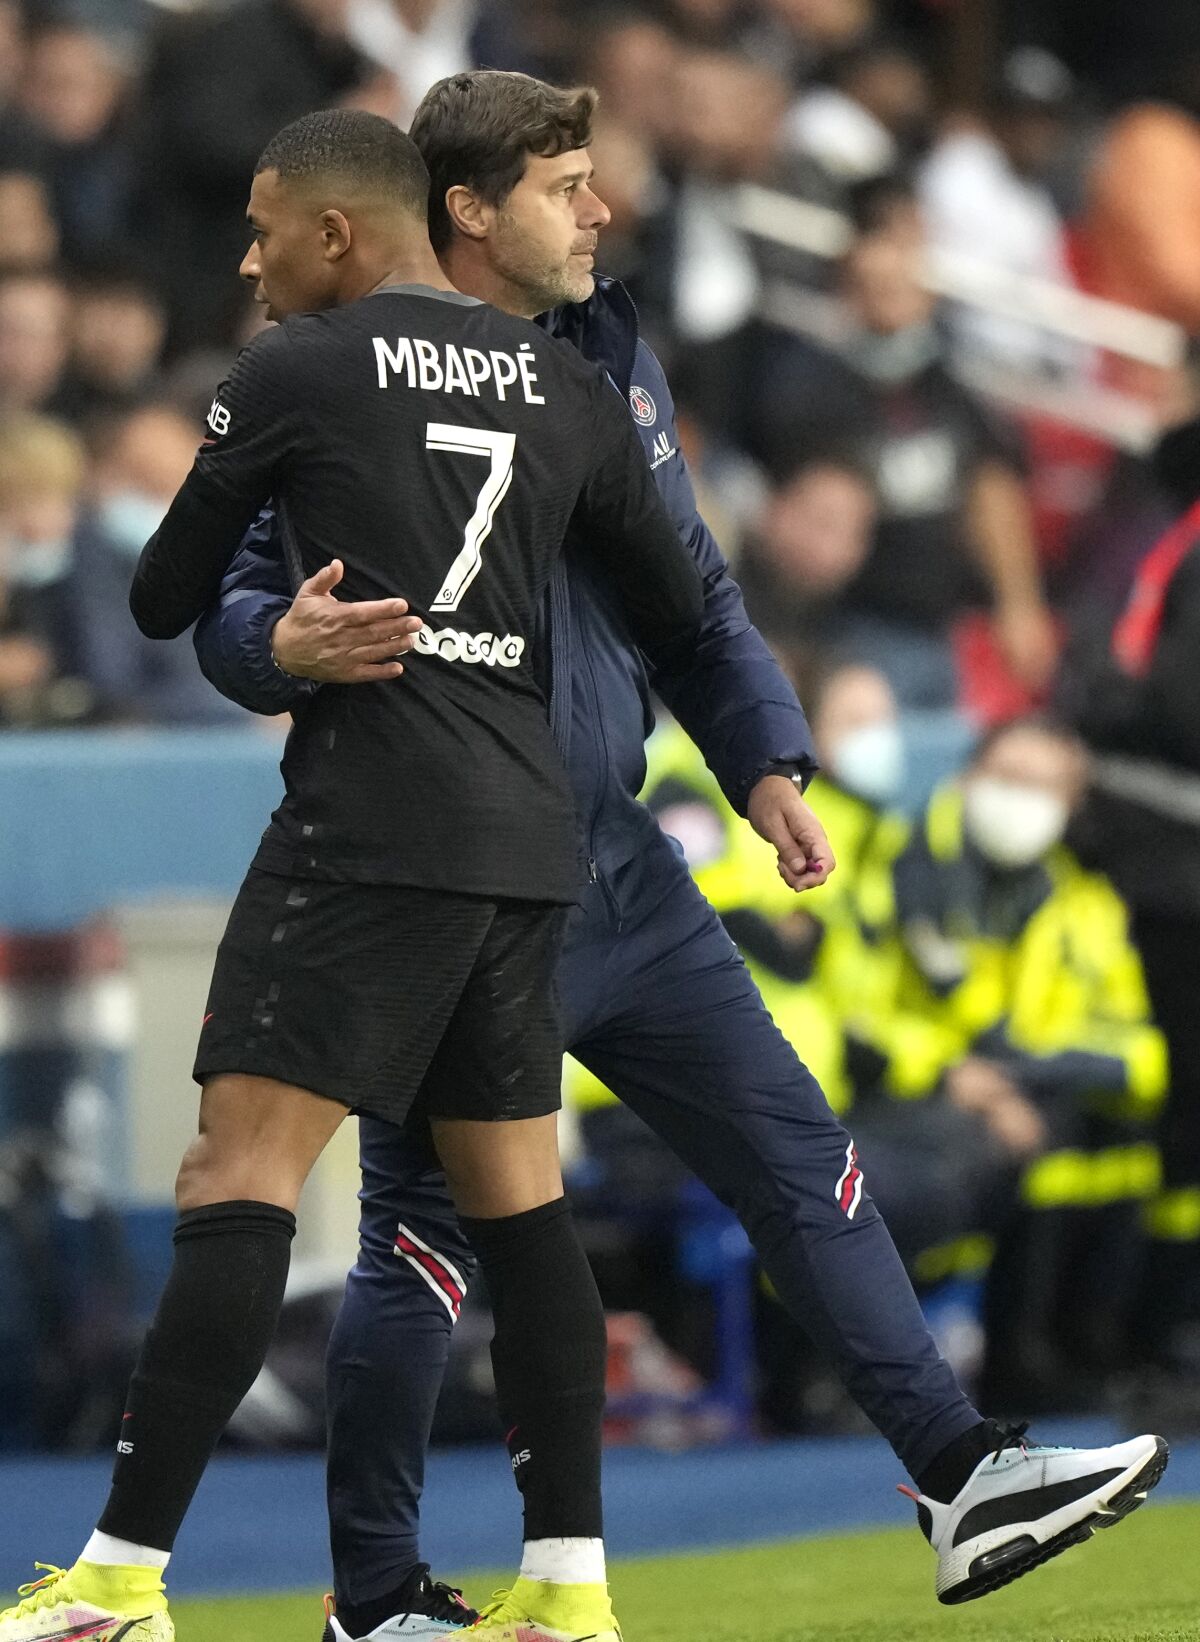 PSG's head coach Mauricio Pochettino, right, and PSG's Kylian Mbappe during the French League One soccer match between Paris Saint-Germain and Angers at the Parc des Princes in Paris, France, Friday, Oct. 15, 2021. (AP Photo/Francois Mori)